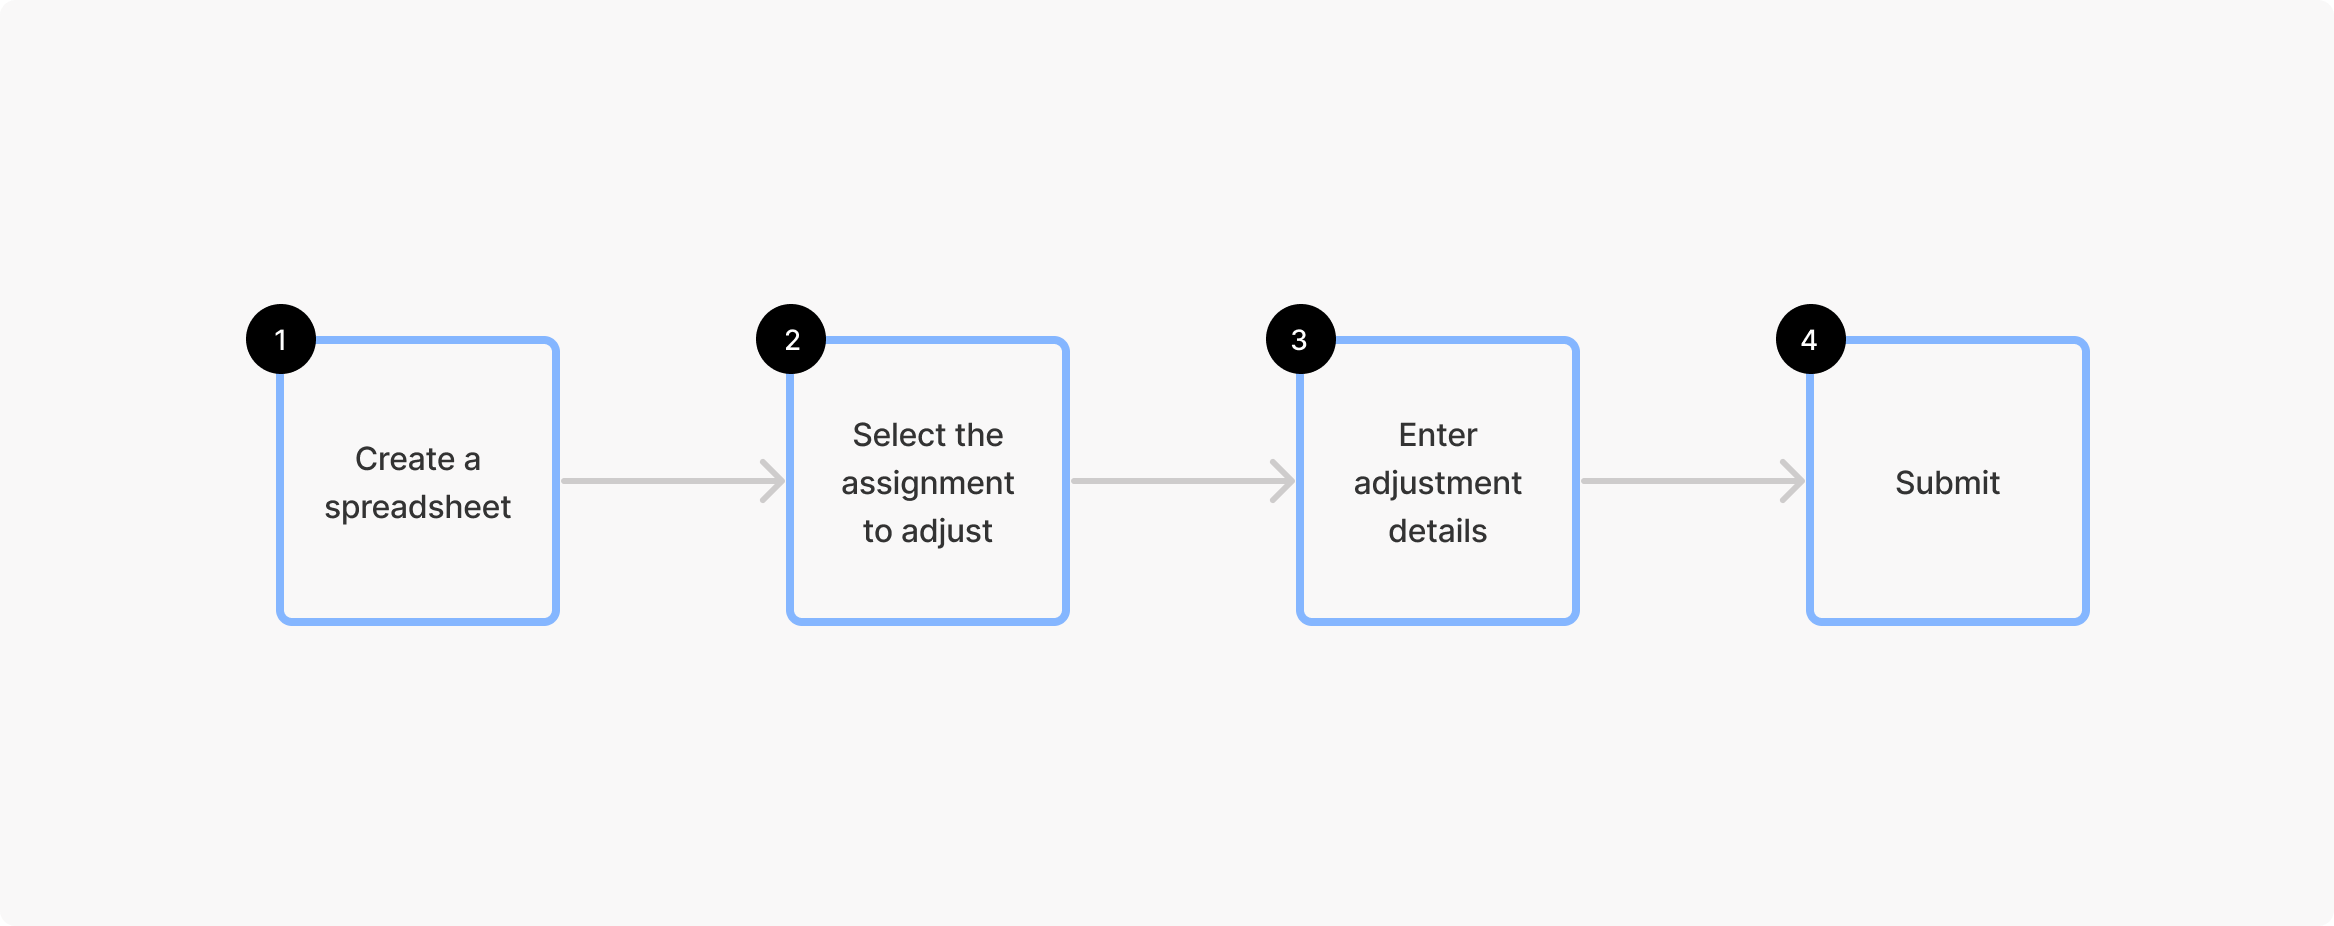 User flow diagram of the new adjustment process.